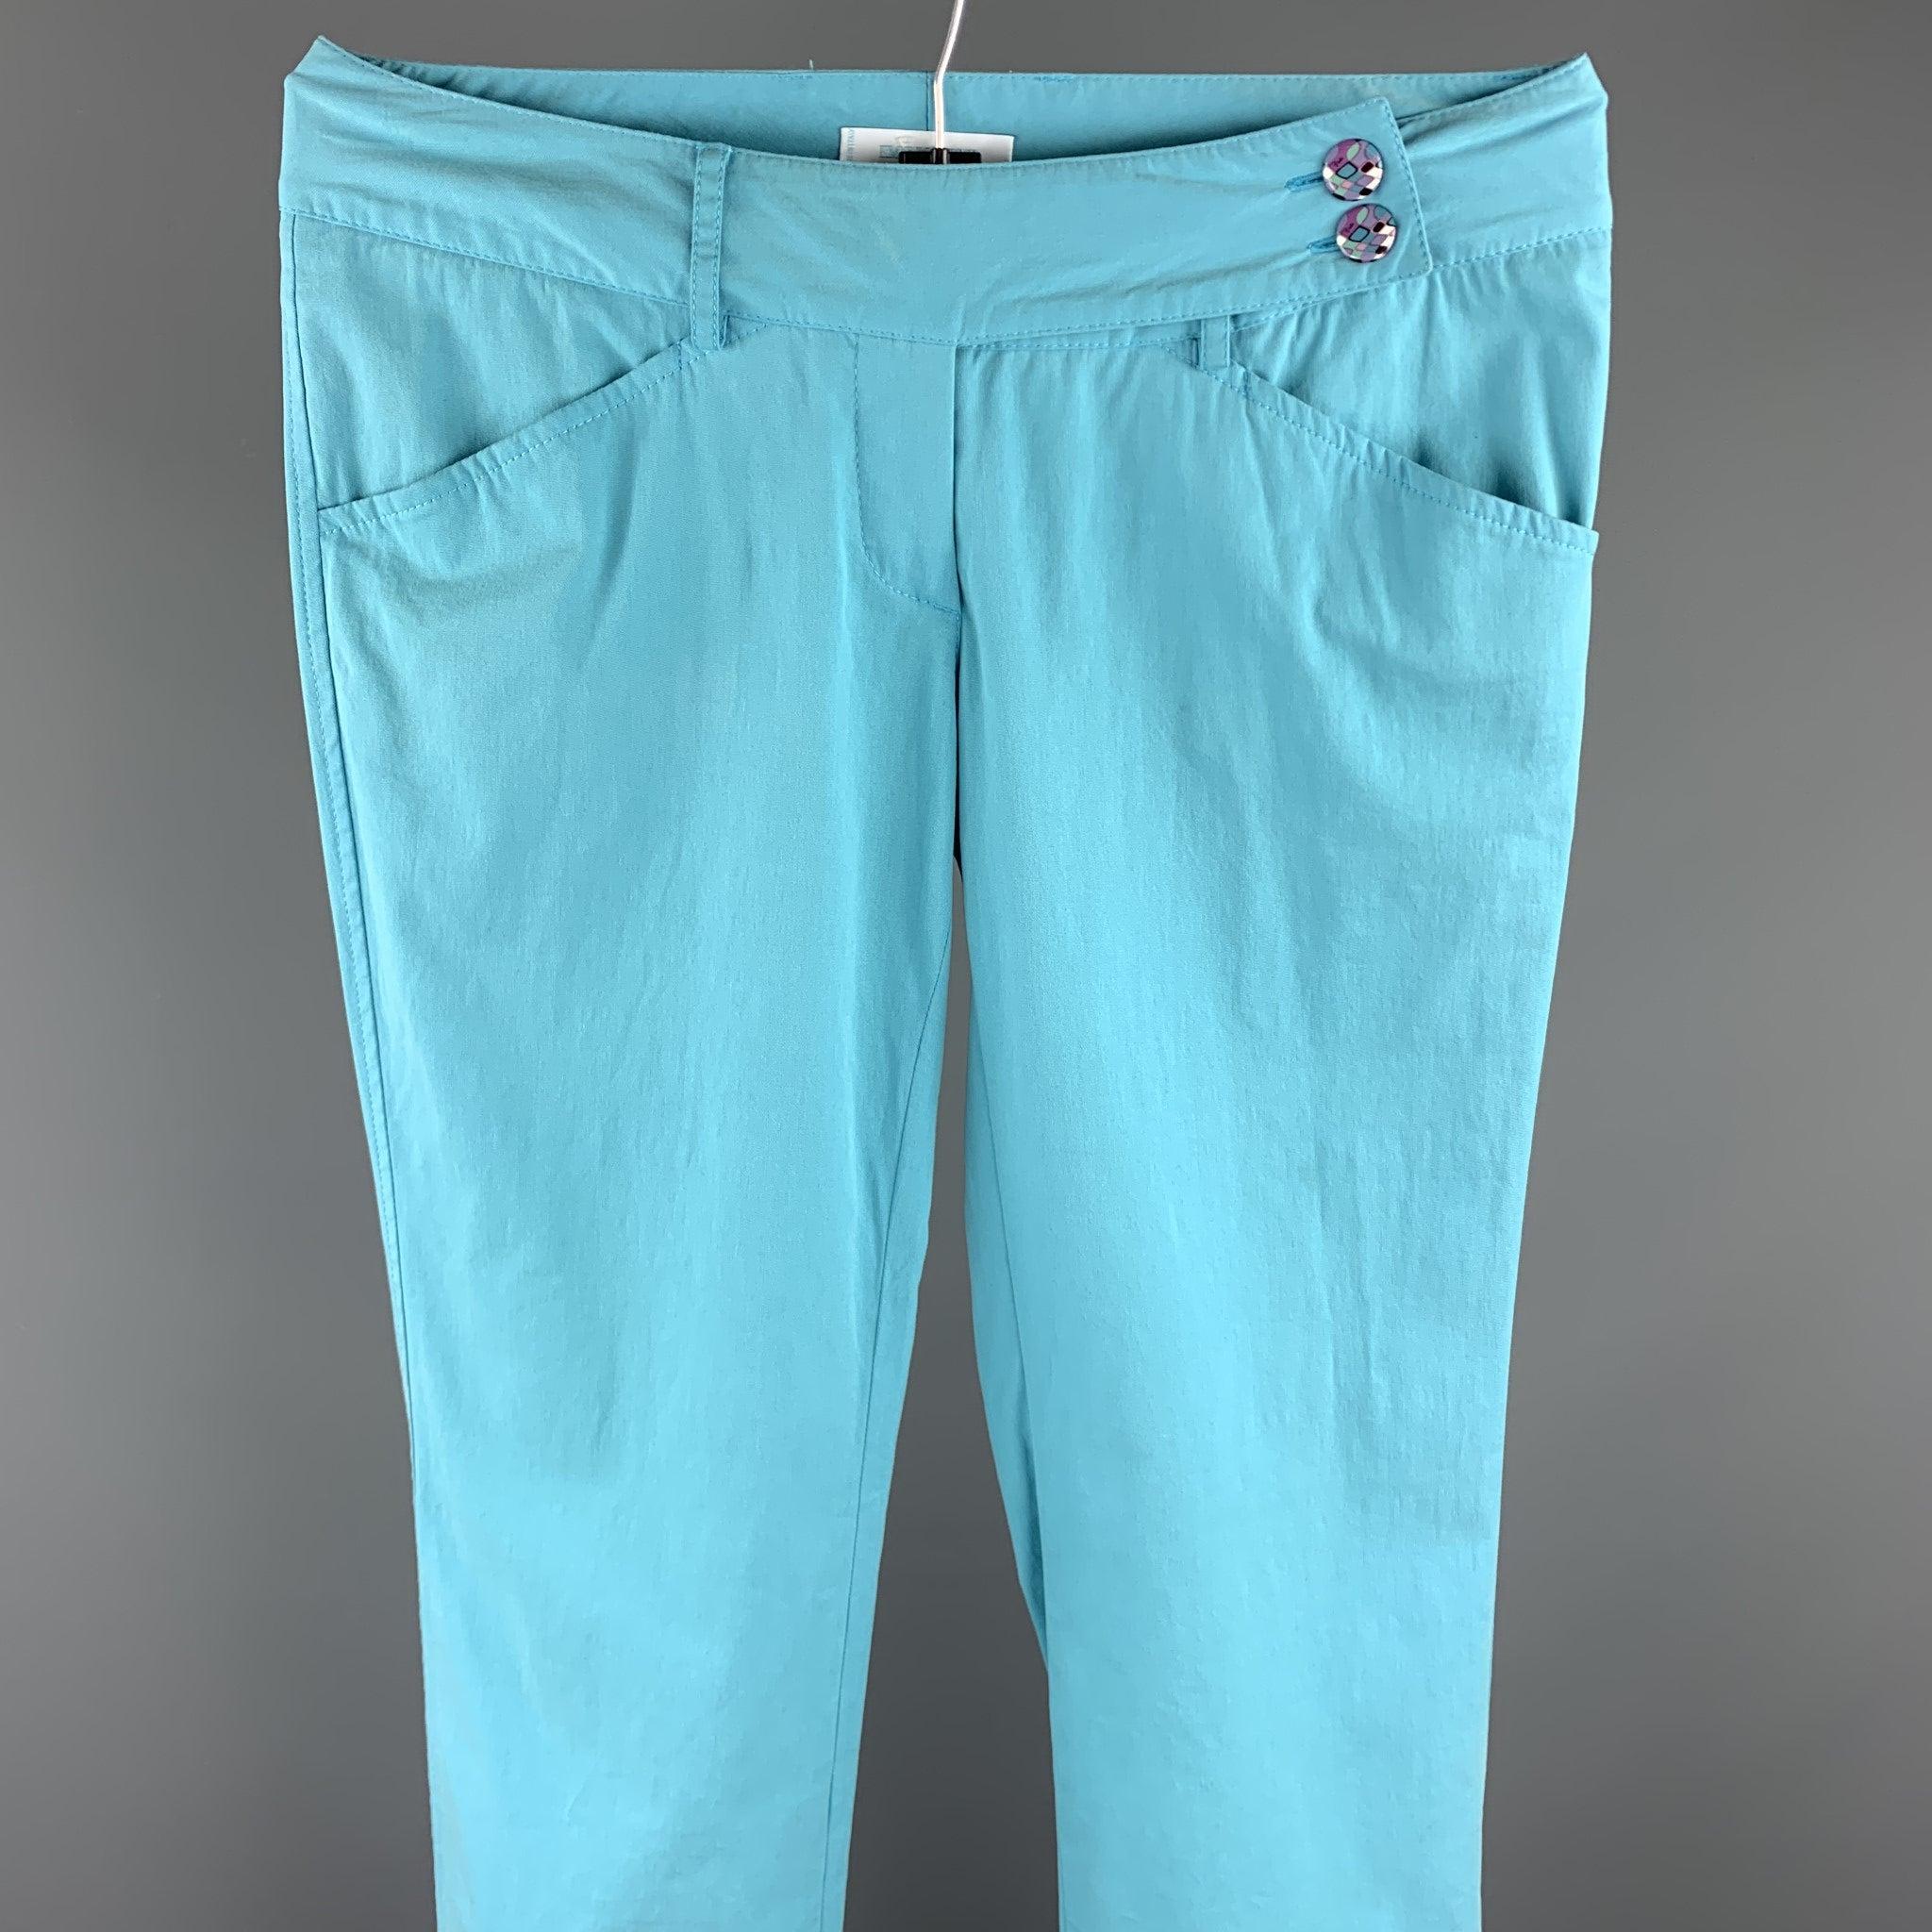 EMILIO PUCCI casual pants comes in a turquoise blue cotton / elastane featuring a straight leg, zip fly, and a double button closure. Made in Italy.
Excellent
Pre-Owned Condition. 

Marked:   6 

Measurements: 
  Waist: 30 inches 
Rise: 5.5 inches